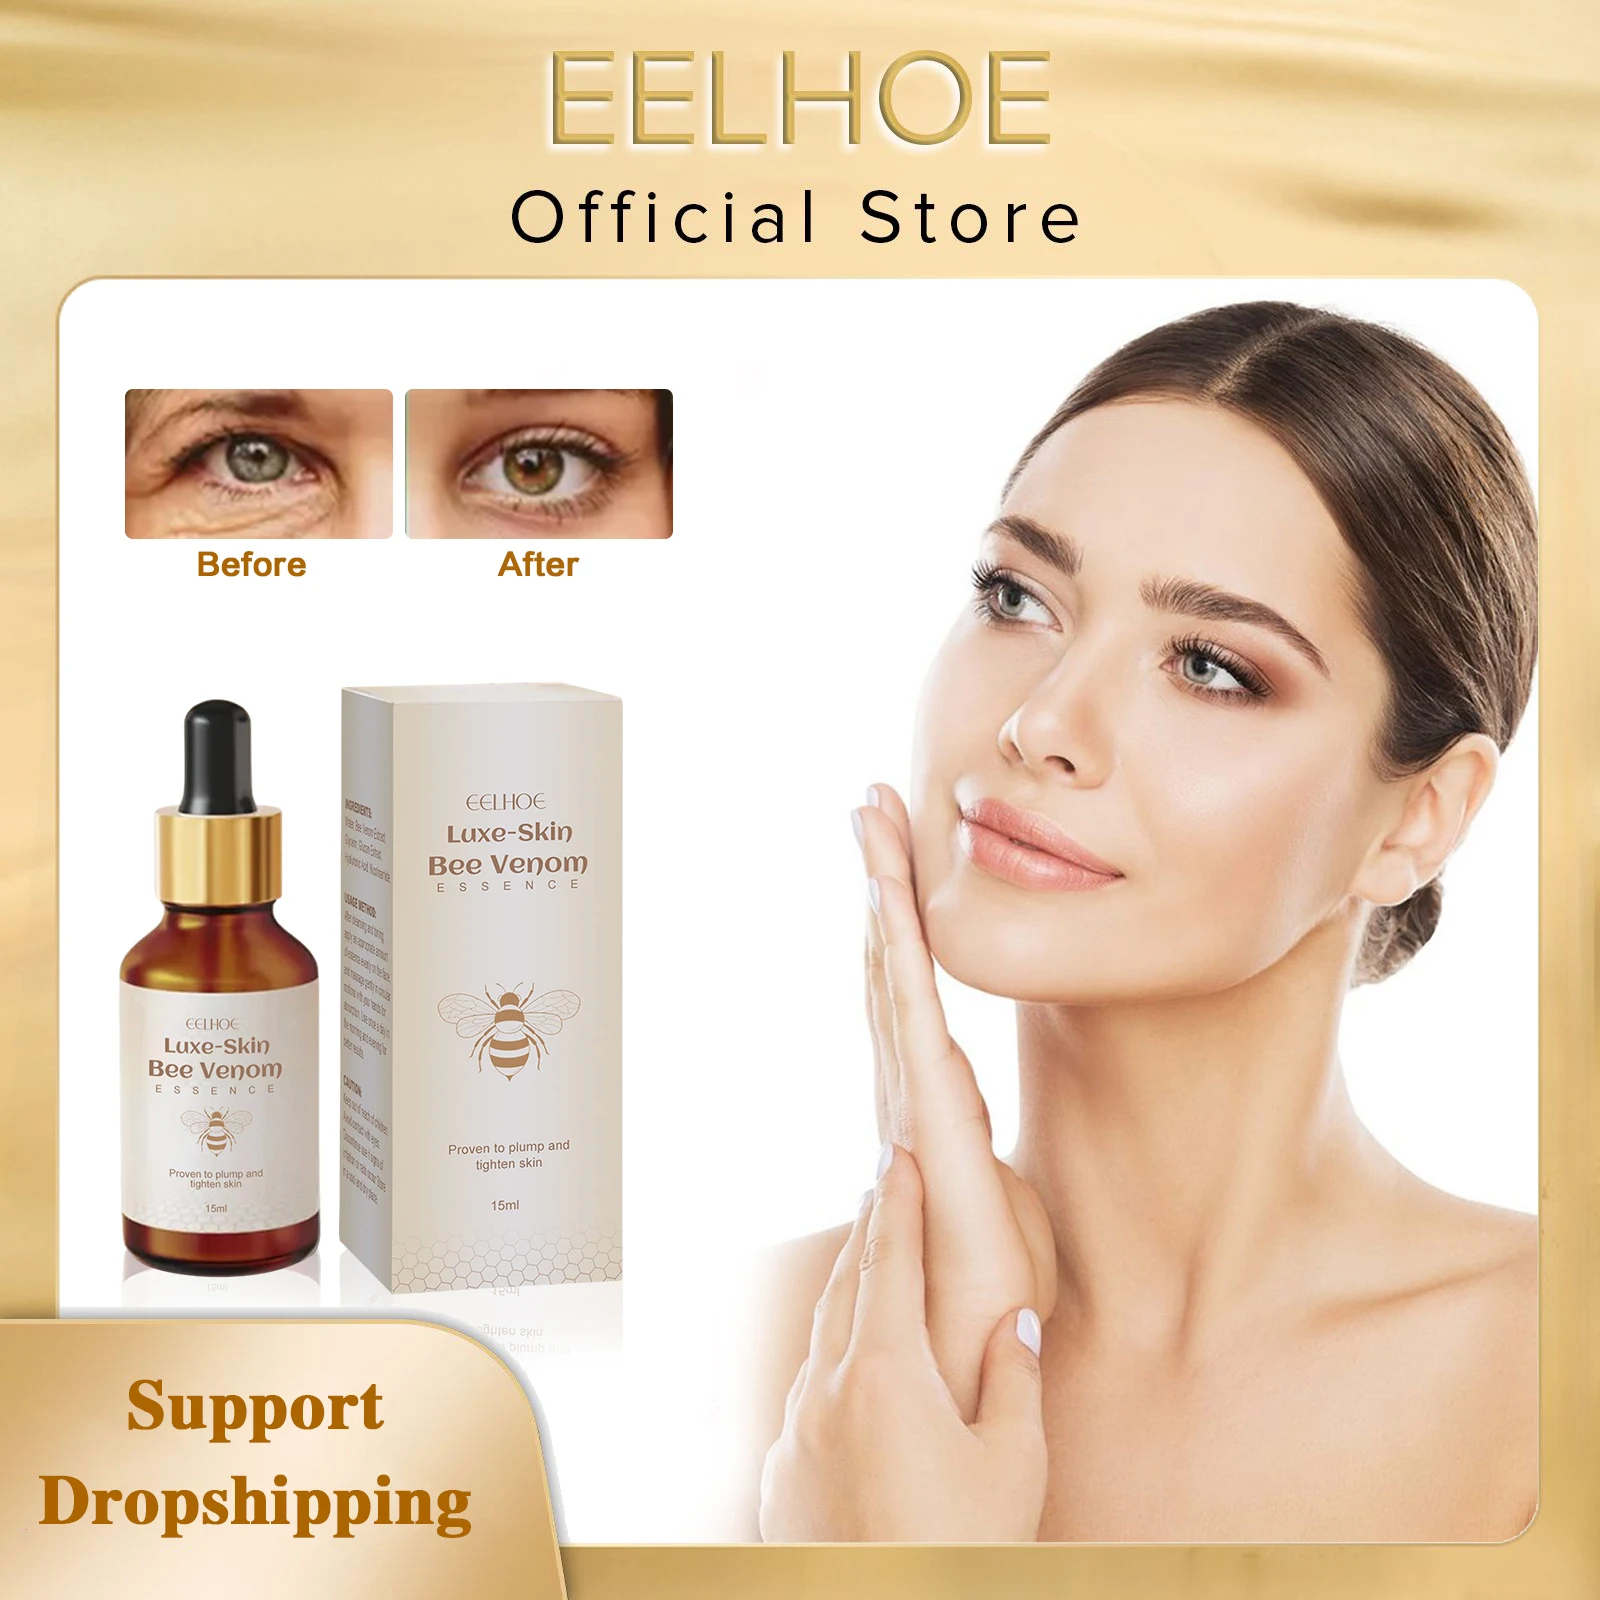 EELHOE Firming Wrinkle Removal Serum Fade Fine Lines Whitening Facial Lifting Tightening Care Moisturizing Anti Wrinkles Essence